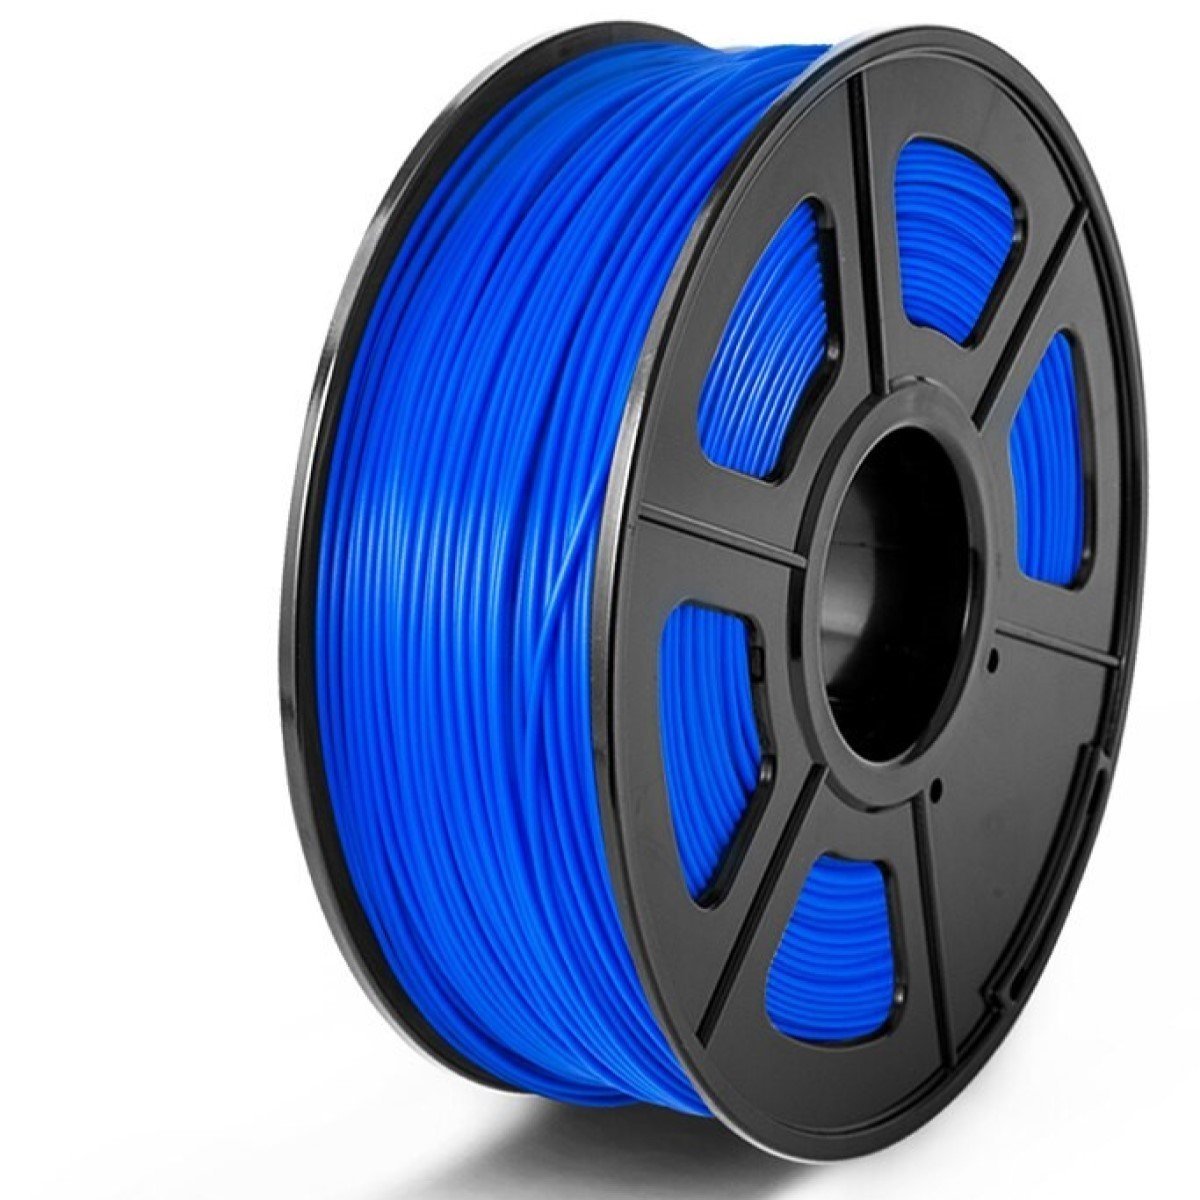 Blue ABS 3D Printer Filament 1.75mm 1Kg Spool (2.2lbs), Dimensional Accuracy of +/- 0.02mm